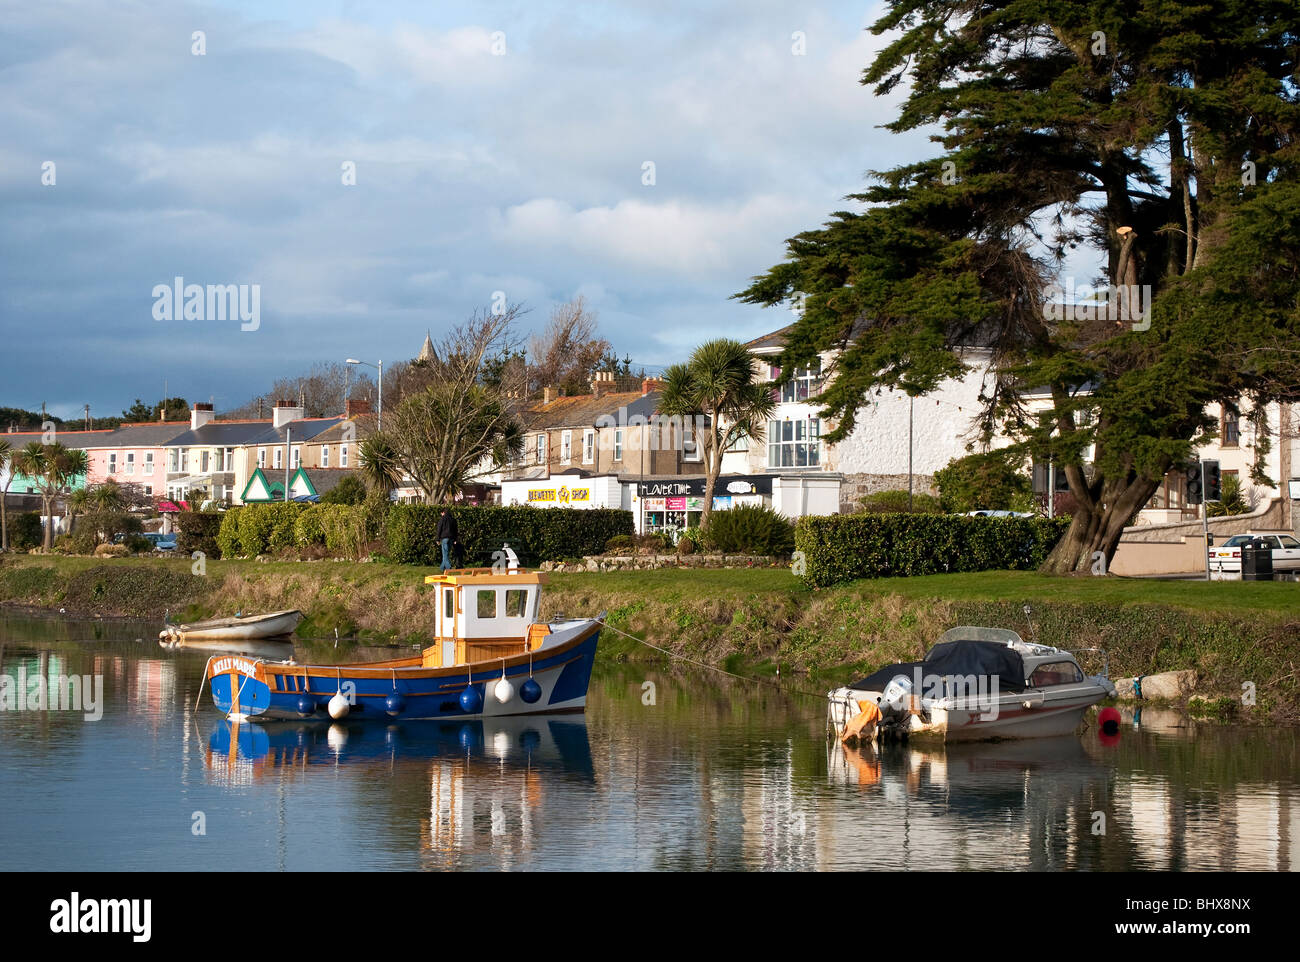 high tide at hayle harbour in cornwall, uk Stock Photo